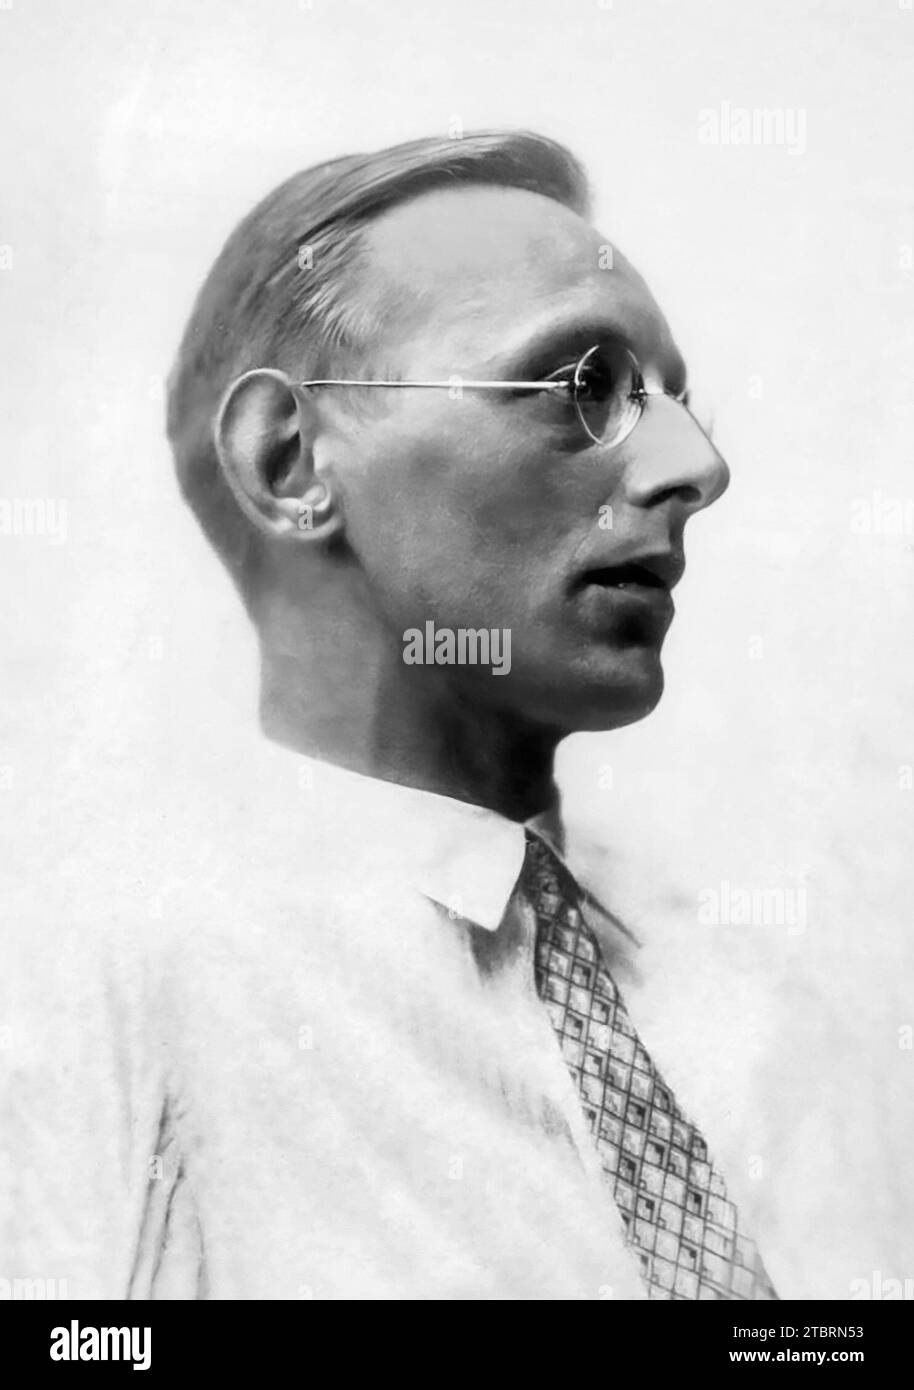 Carl Orff. Portrait of the German composer and music educator, Carl Heinrich Maria Orff (1895-1982) by Hanns Holdt, 1940 Stock Photo